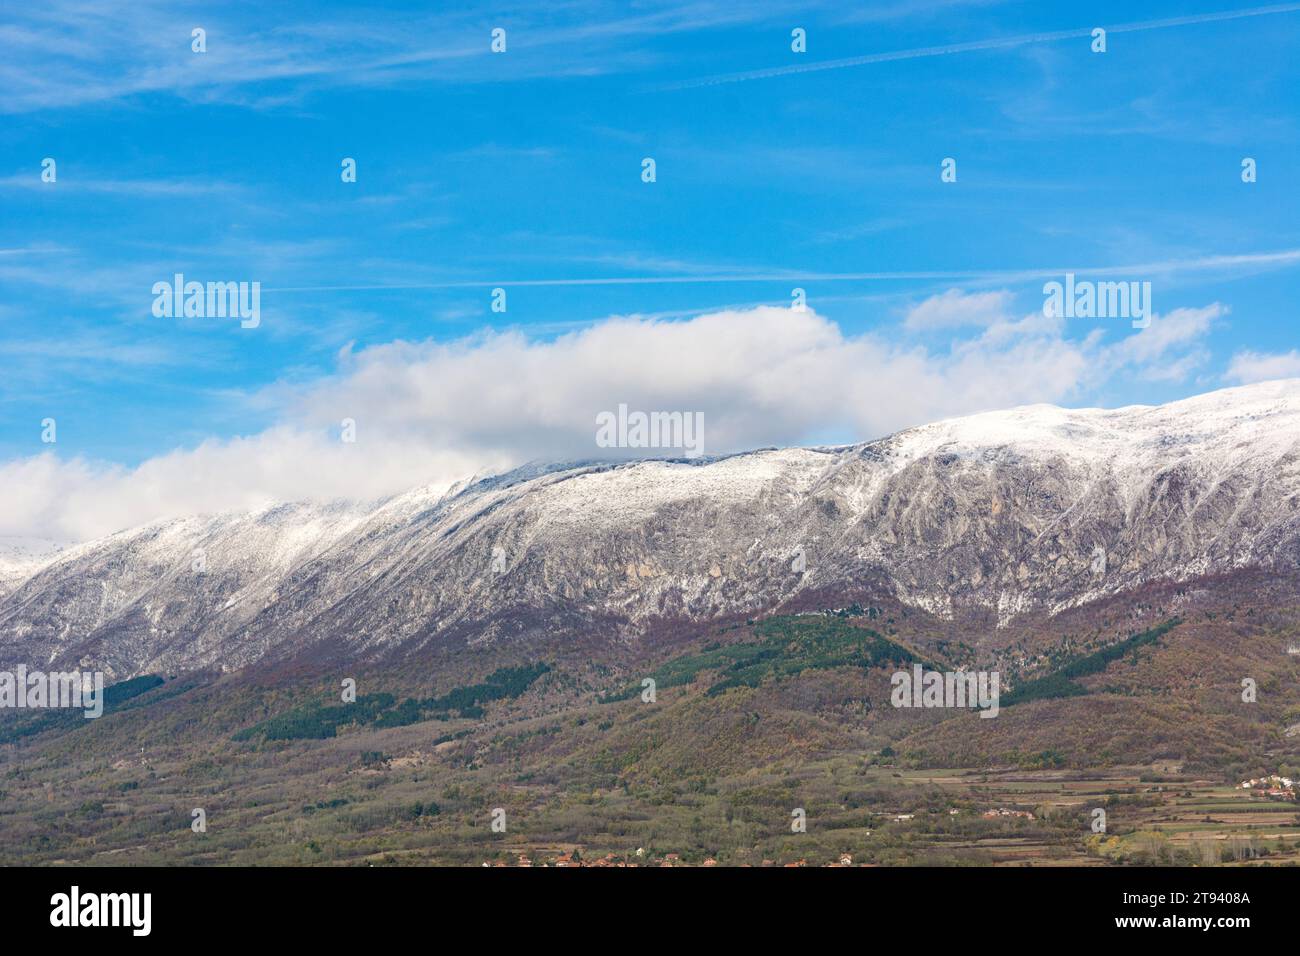 Snow covered peaks of a dry mountain, accompanied by white clouds in a national park. A beautiful blue sky dominates the chilly, sunny autumn day Stock Photo